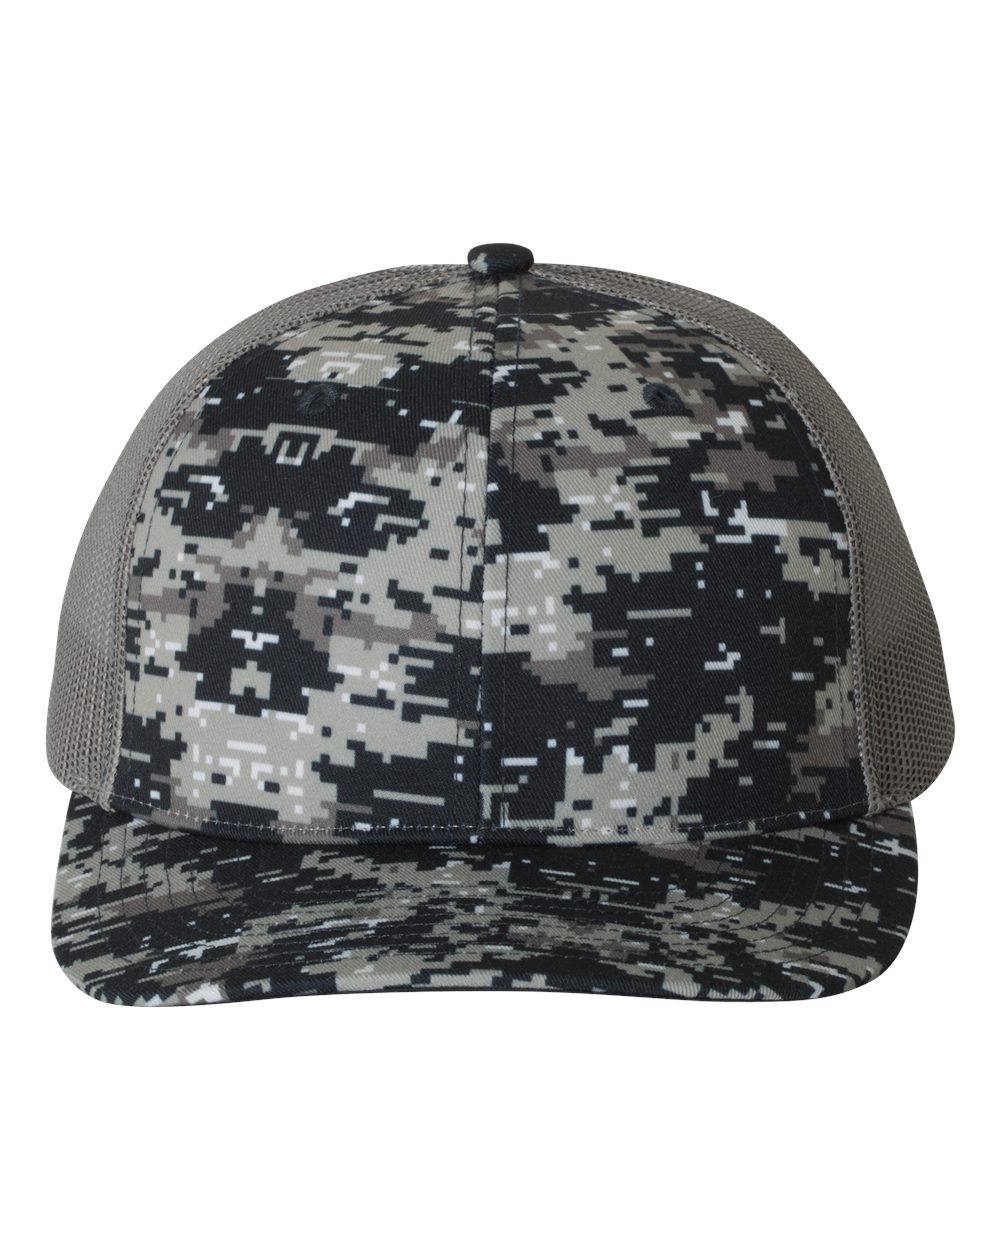 click to view Navy Digital Camo/ Charcoal